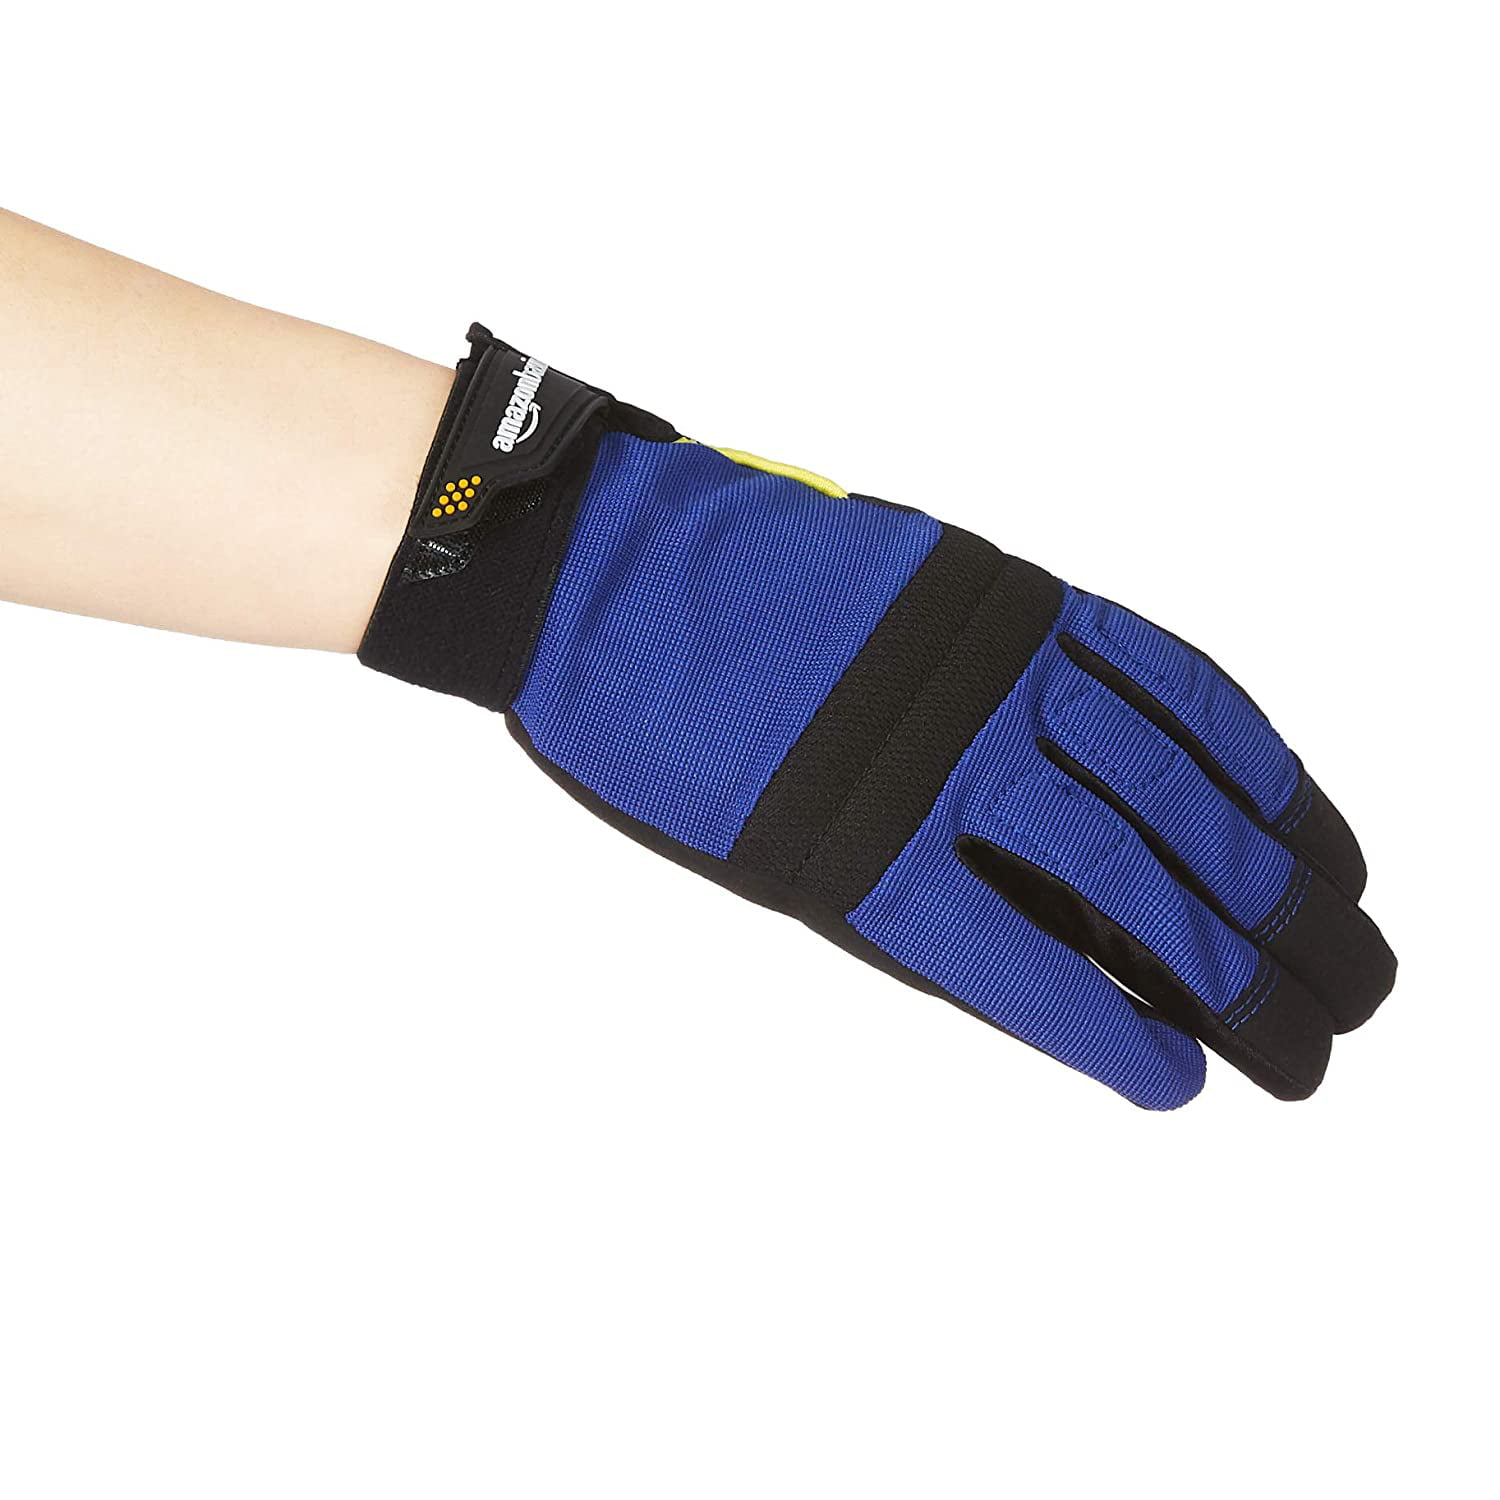 OX Nitrile Glove Pairs Large Oil Repellent Protect Work Gloves Wear Grip Flex 